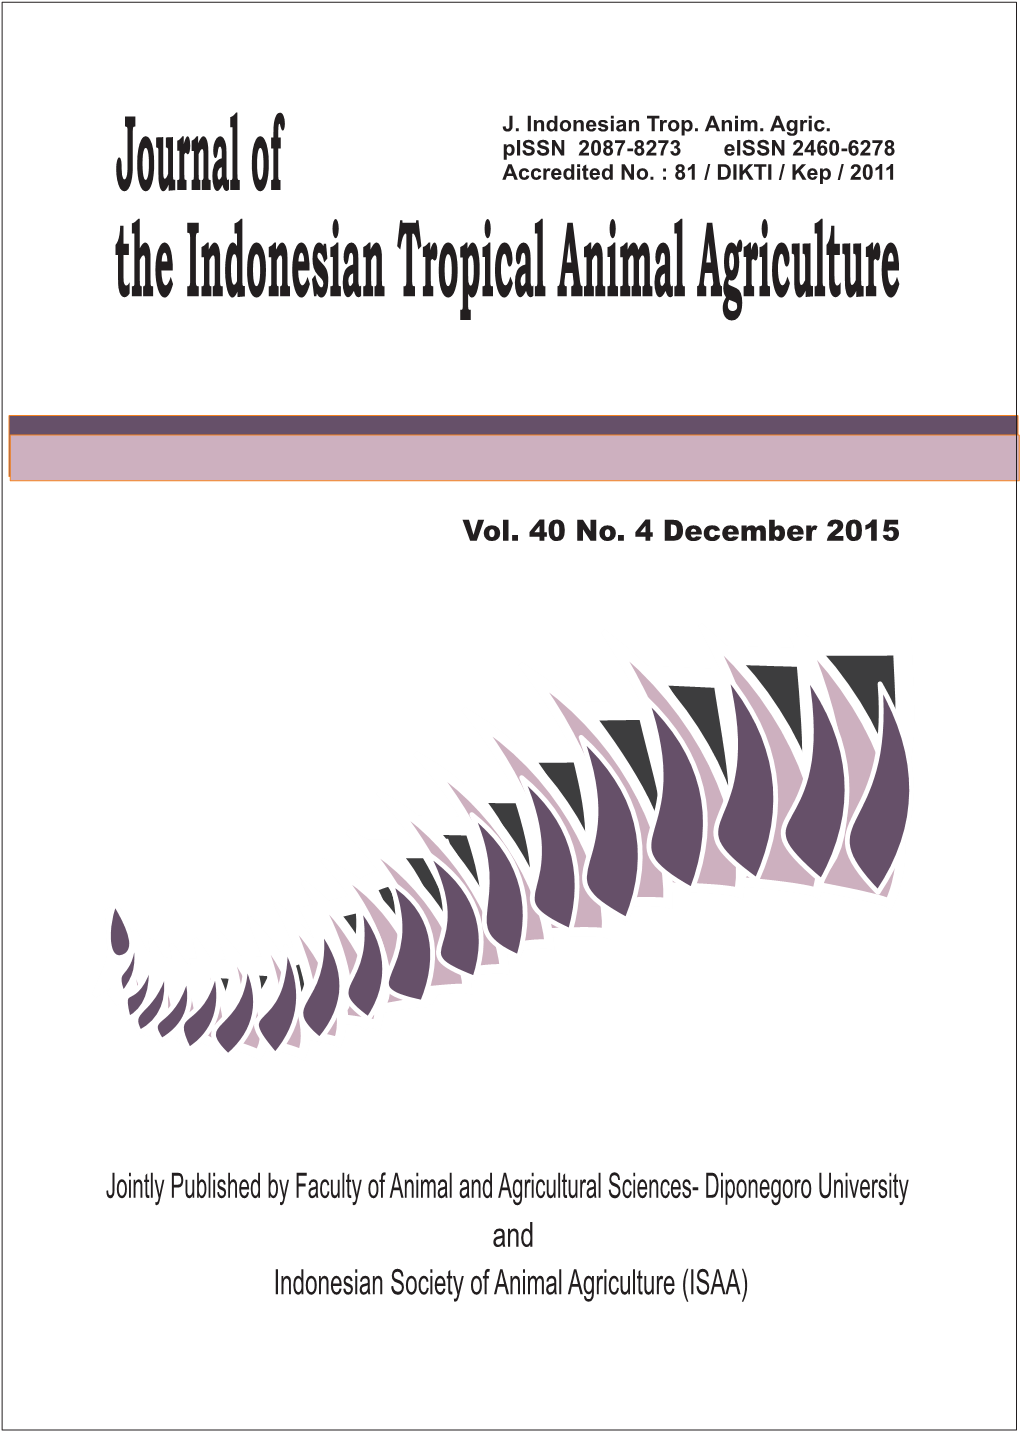 Indonesian Society of Animal Agriculture (ISAA) Jointly Published